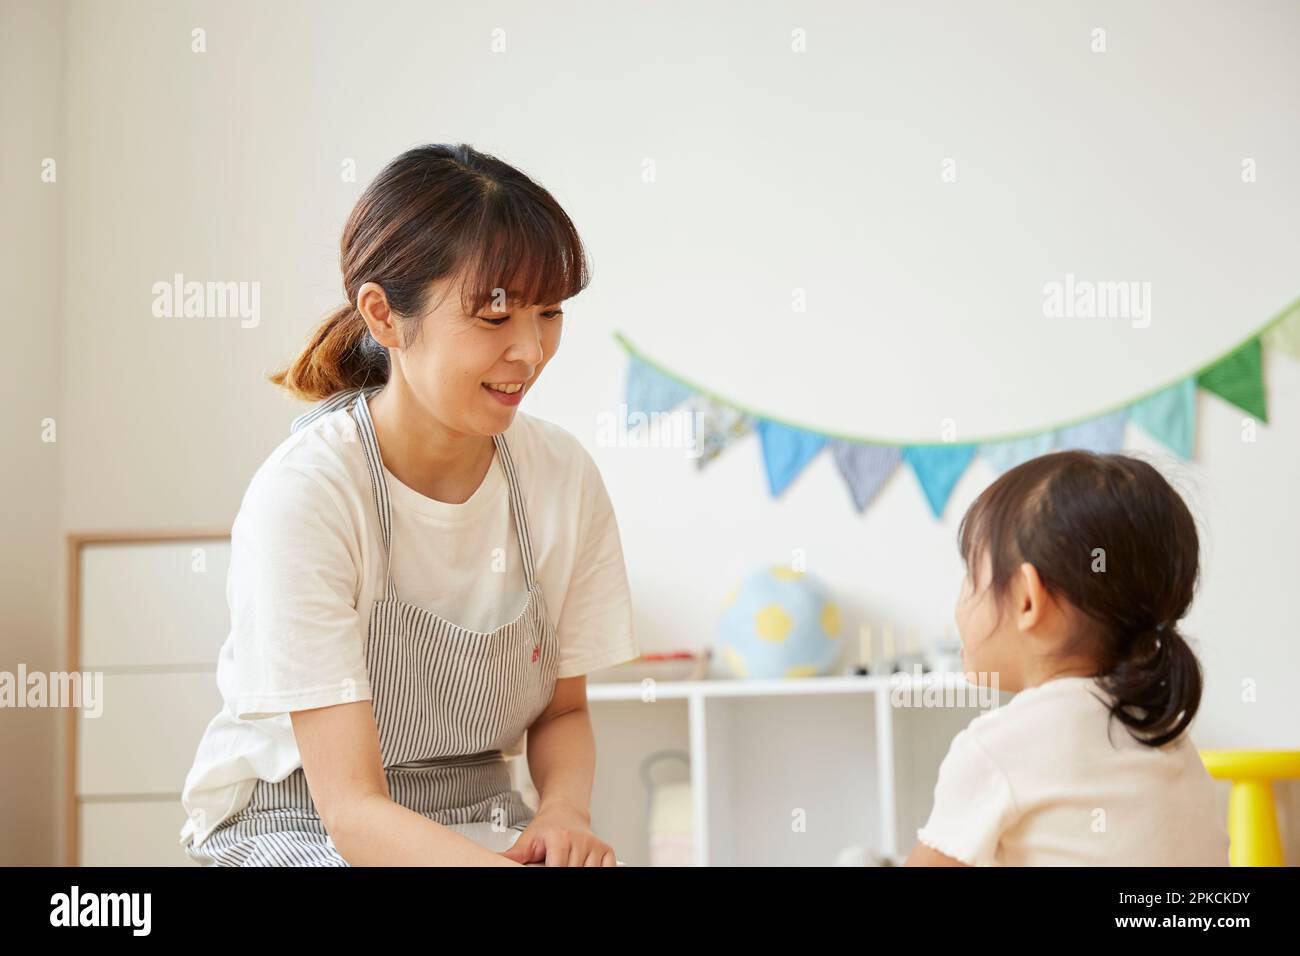 Child care worker taking care of children at a daycare center Stock Photo